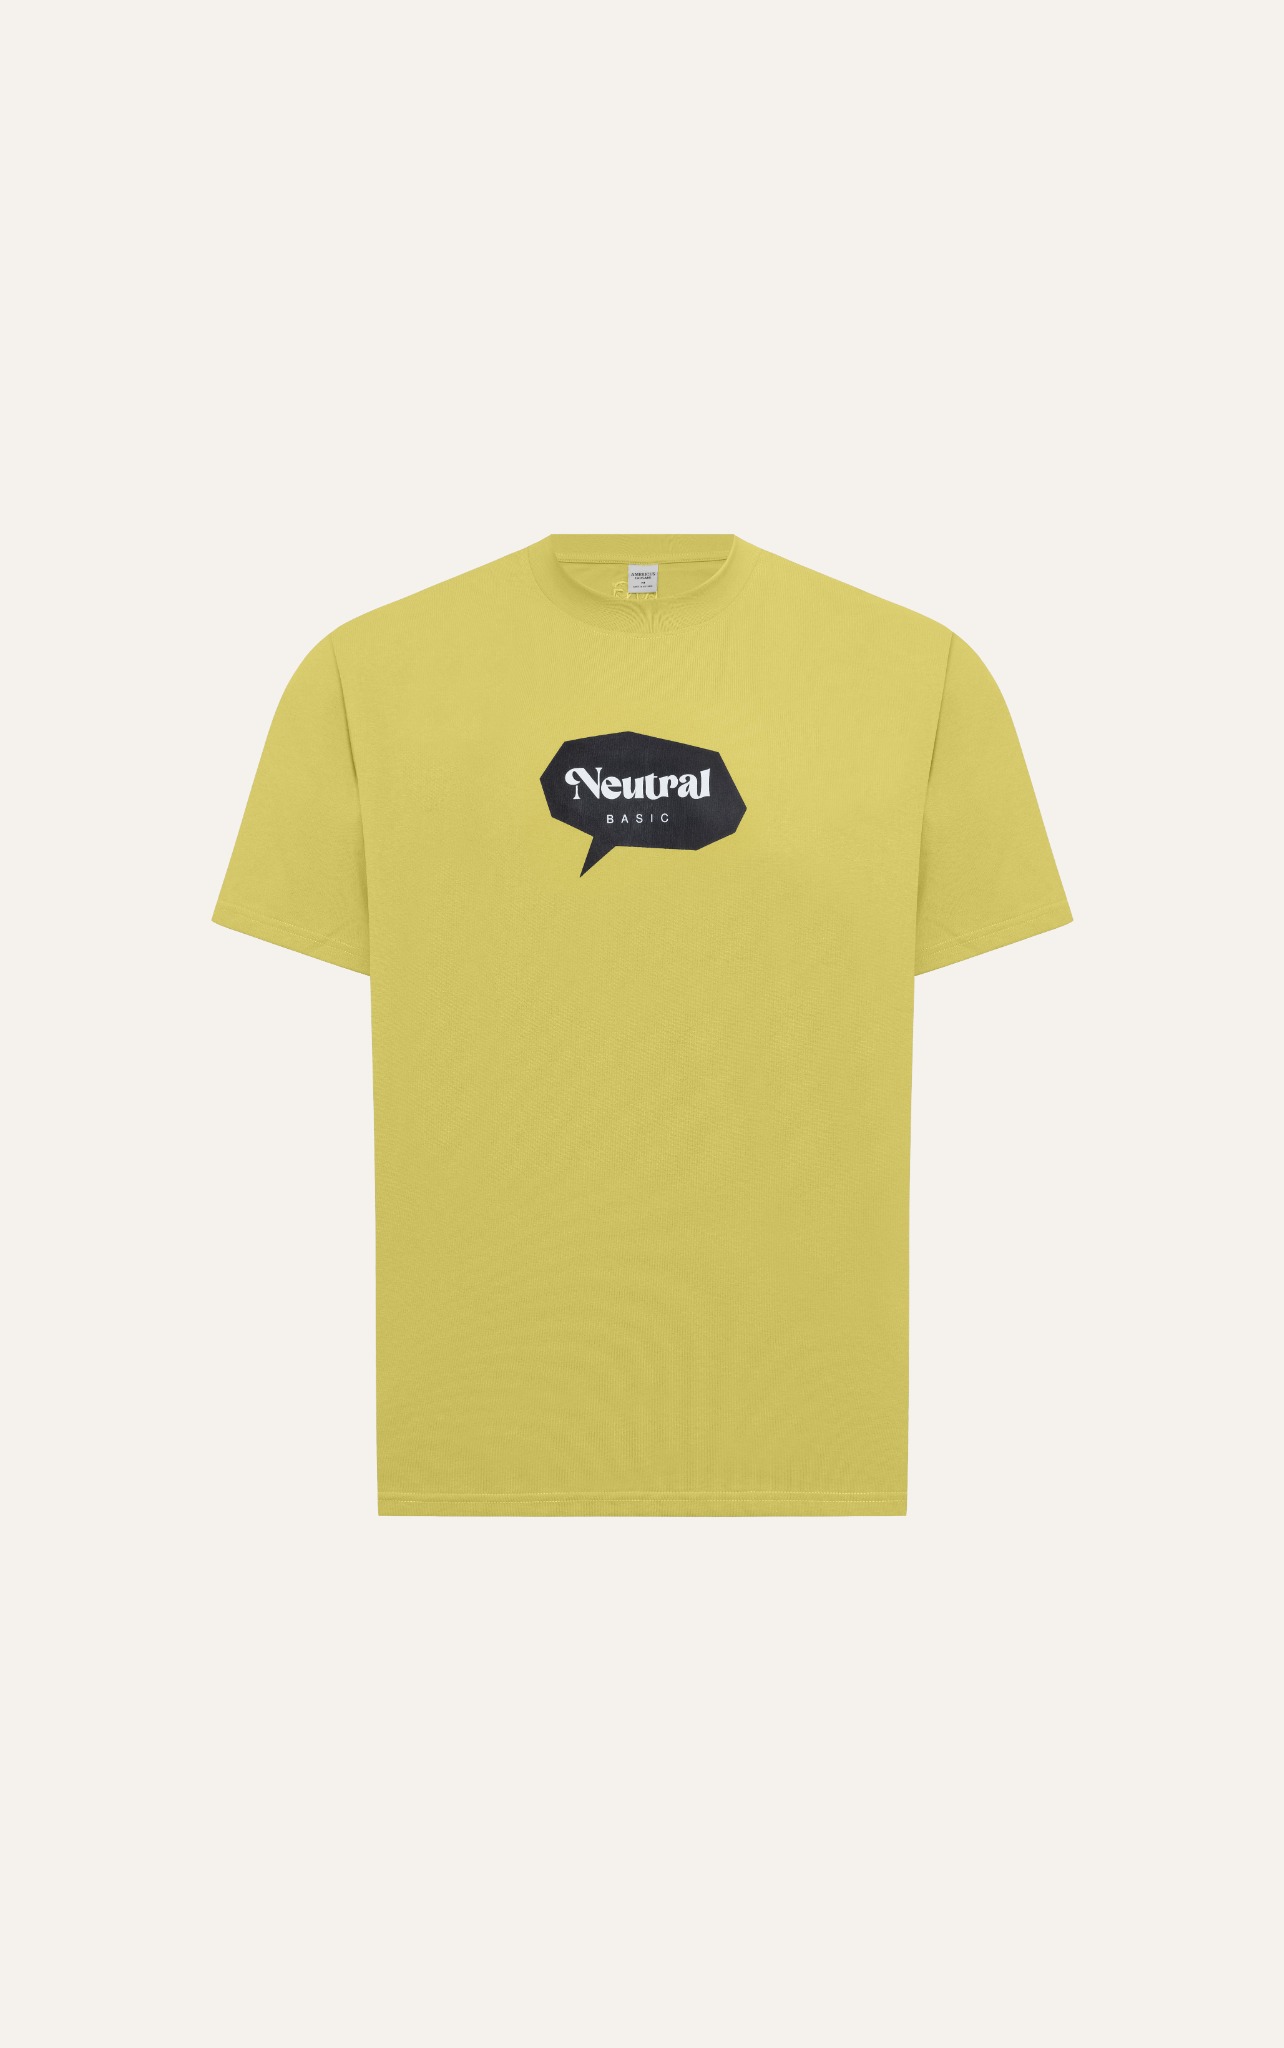 AG688 FACTORY OVERSIZE PRINTED "NEUTRAL" T-SHIRT - YELLOW